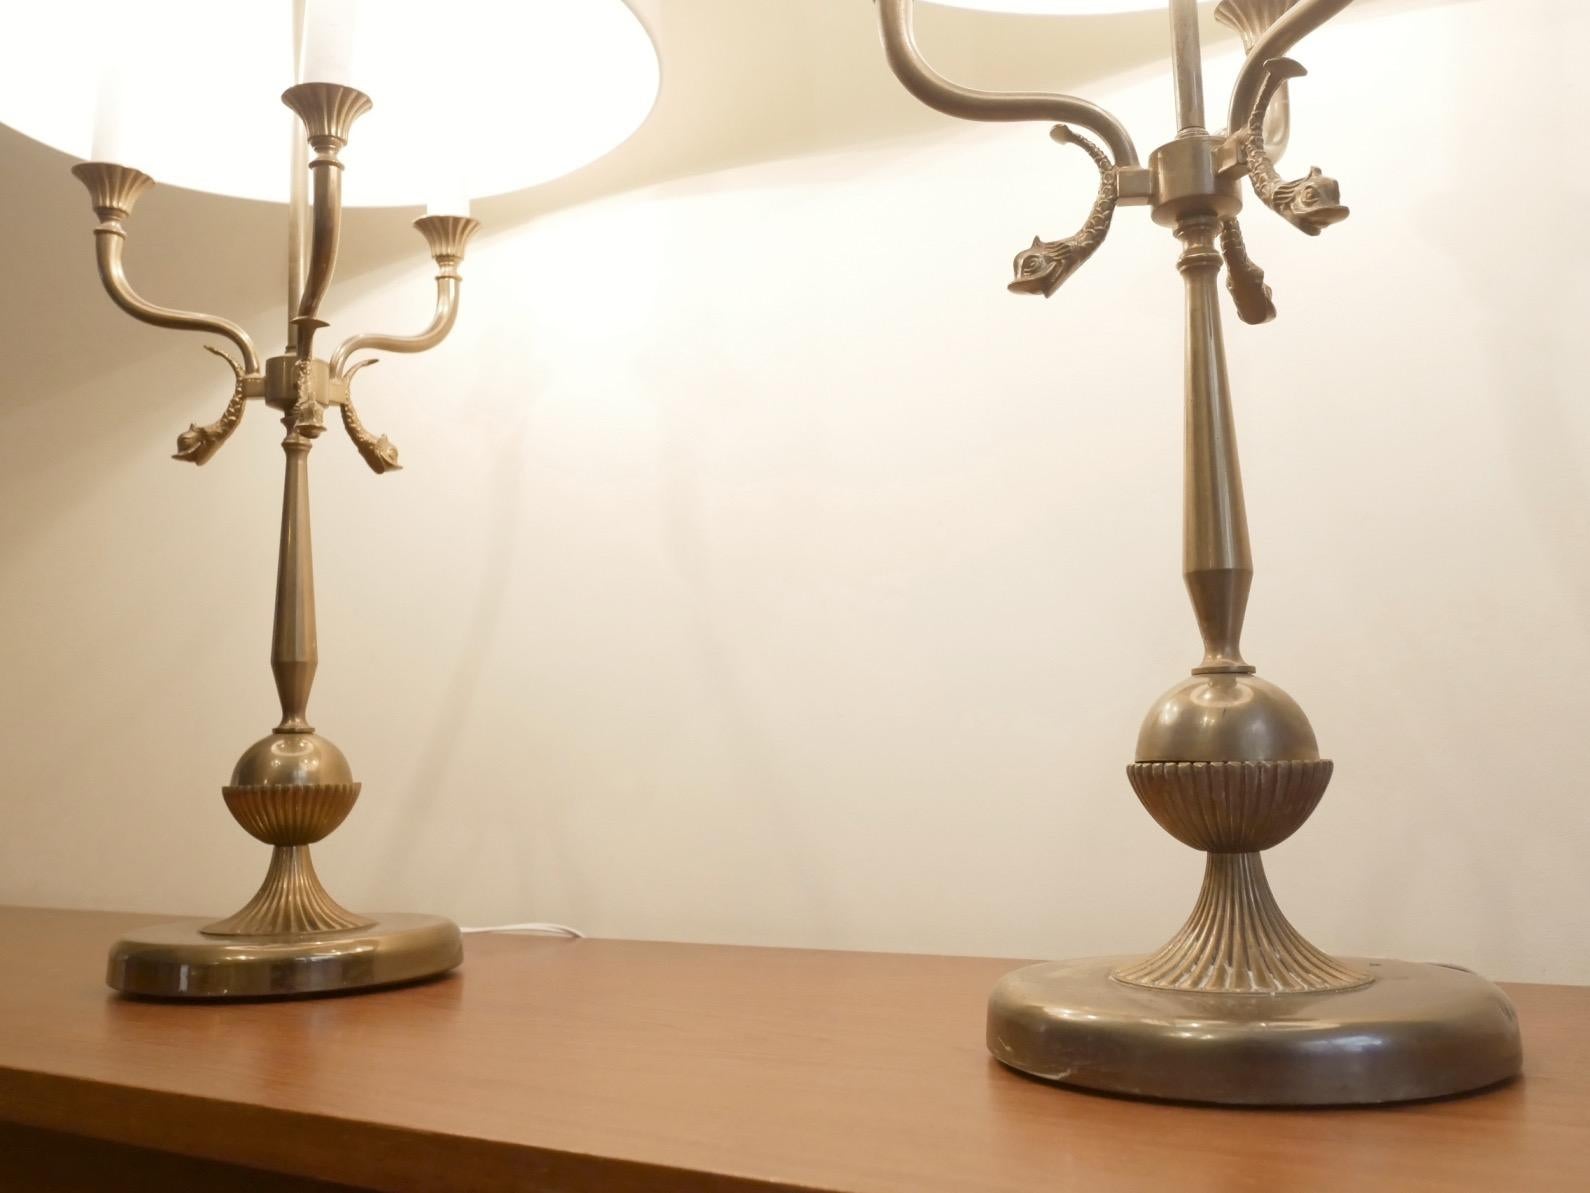 Pair of Xl Brass Candelabra Dolphin Shaped Table Lamps, 1940s For Sale 1